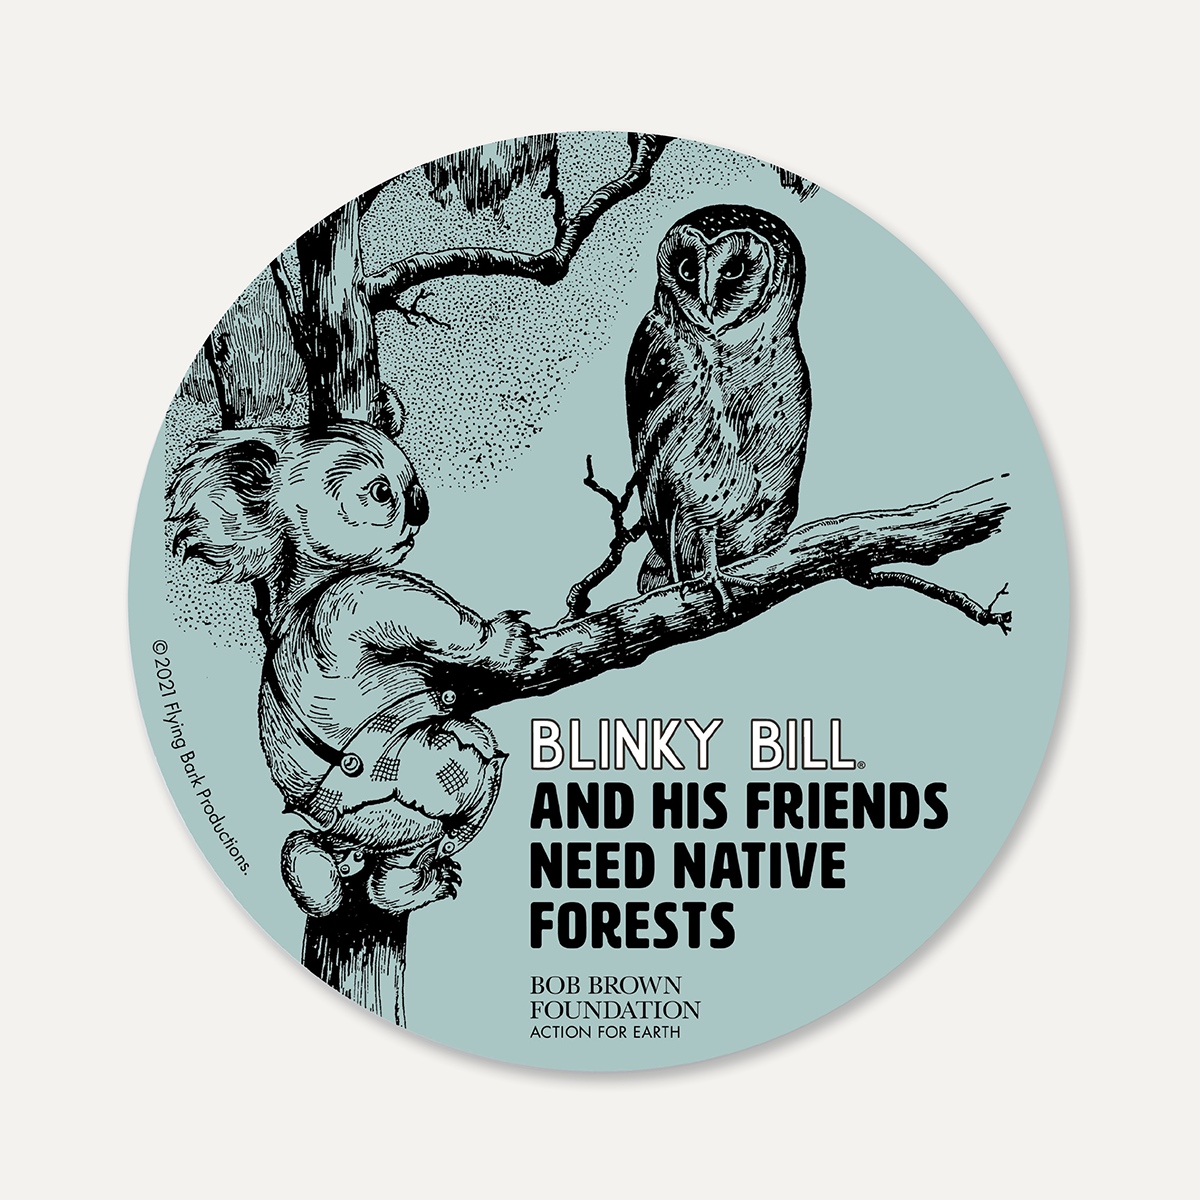 Blinky Bill and Friends Need Native Forests sticker